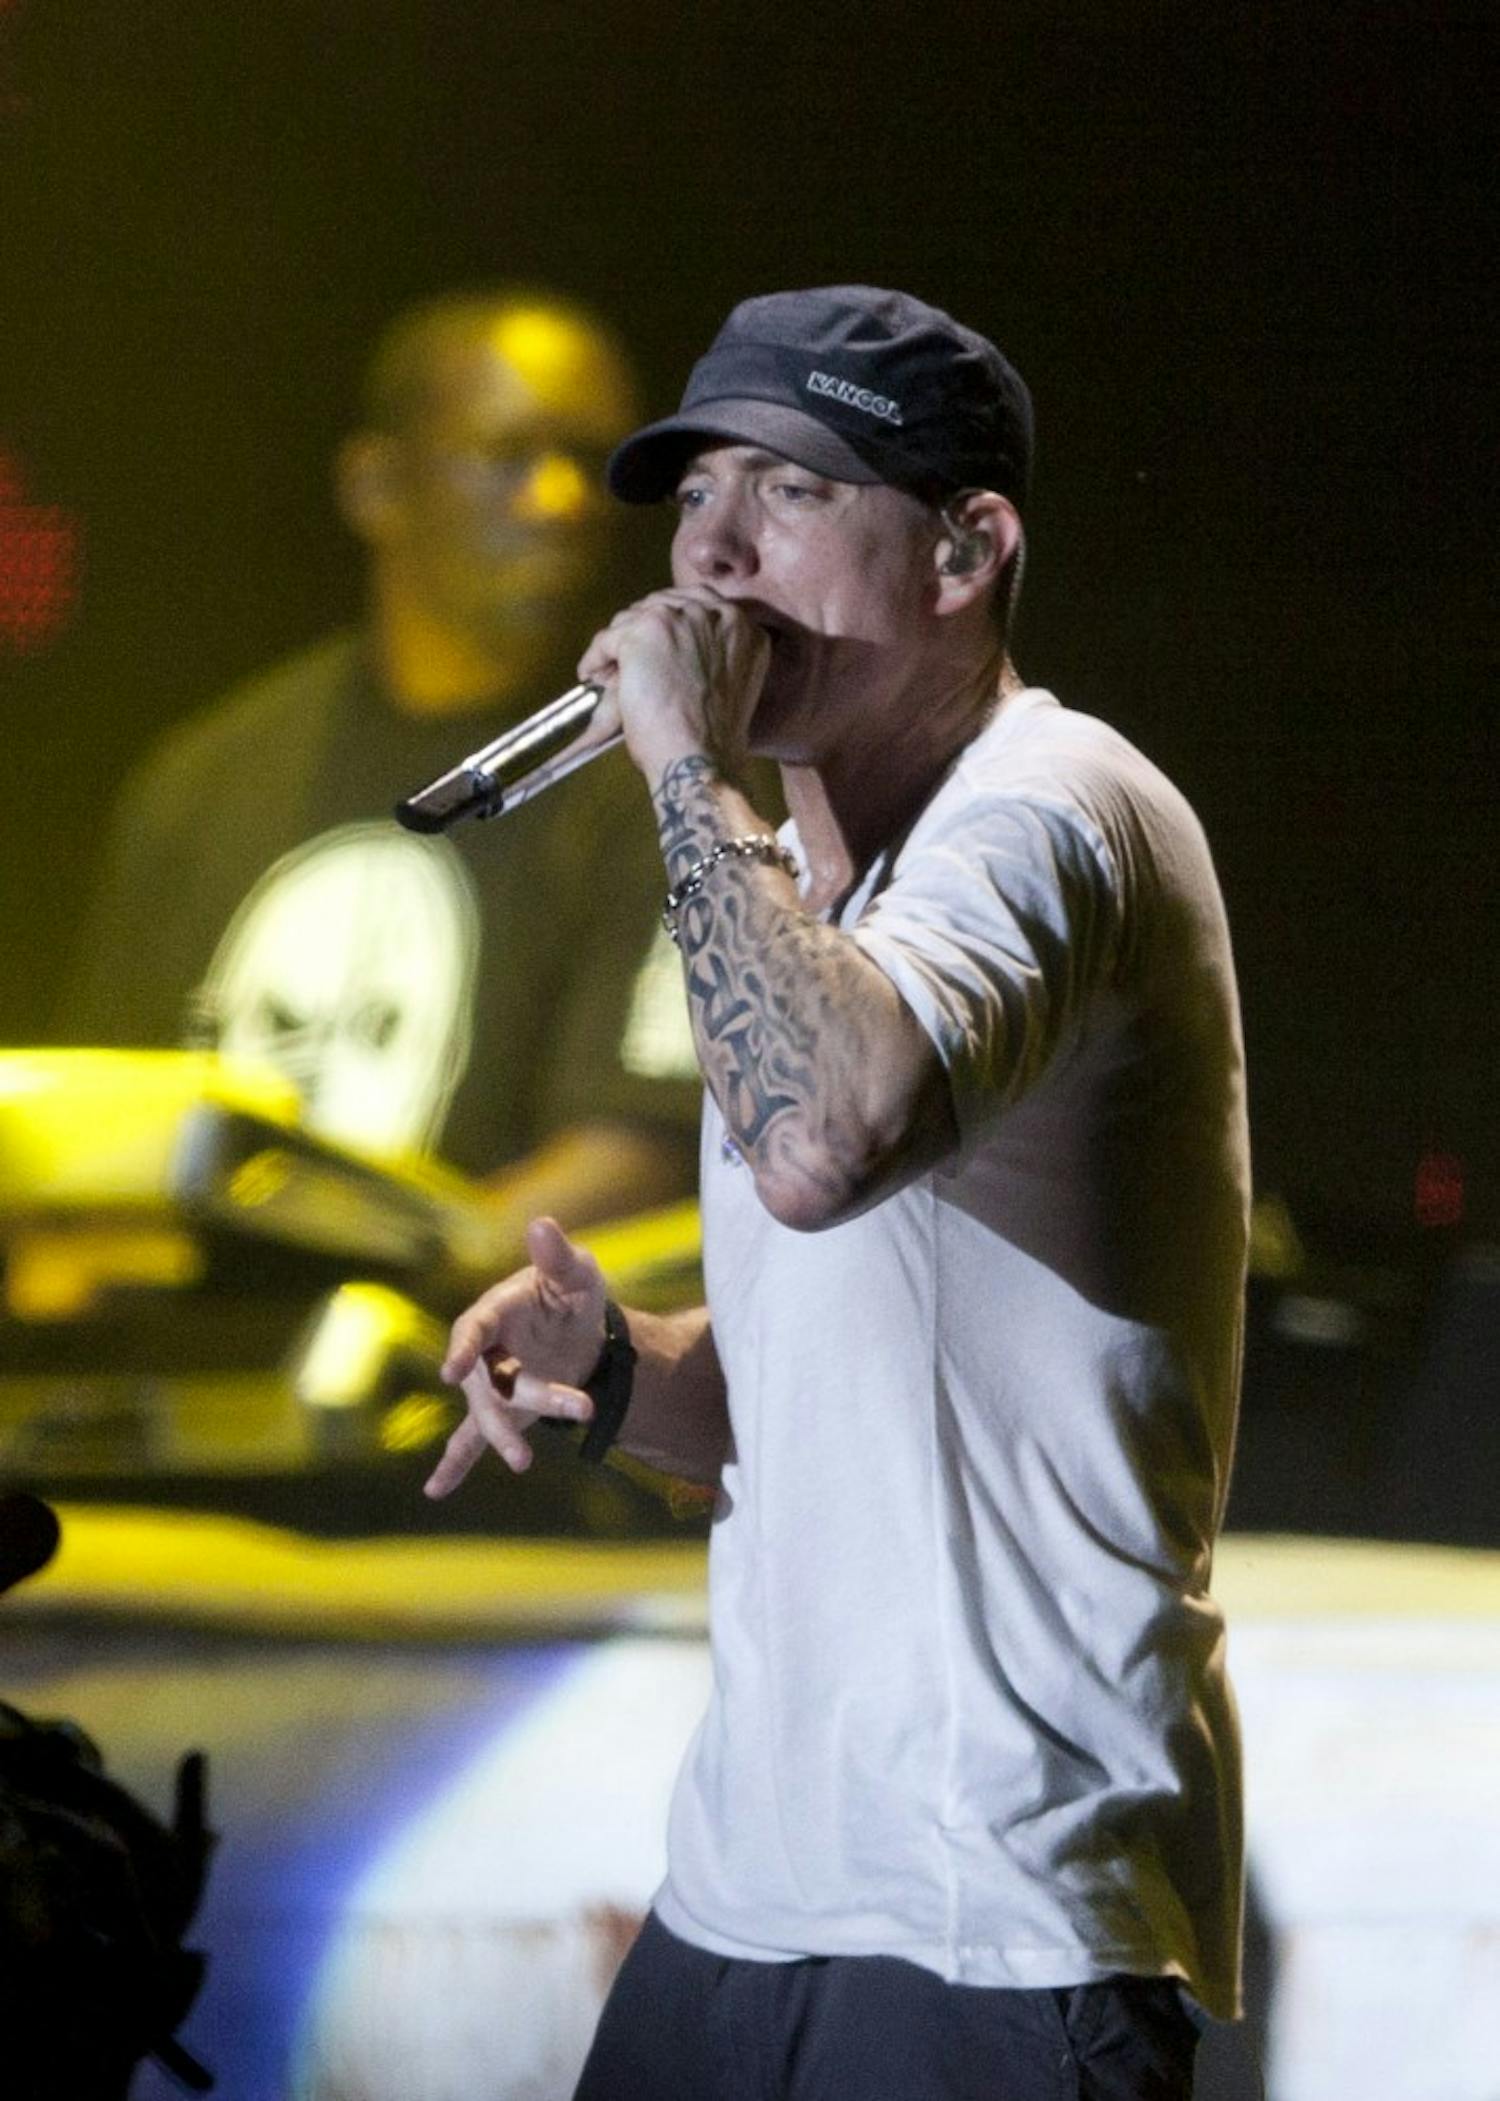 Eminem performs at Lollapalooza Sunday, August 7, 2011 in Chicago, Illinois. (Lenny Gilmore/RedEye/MCT)